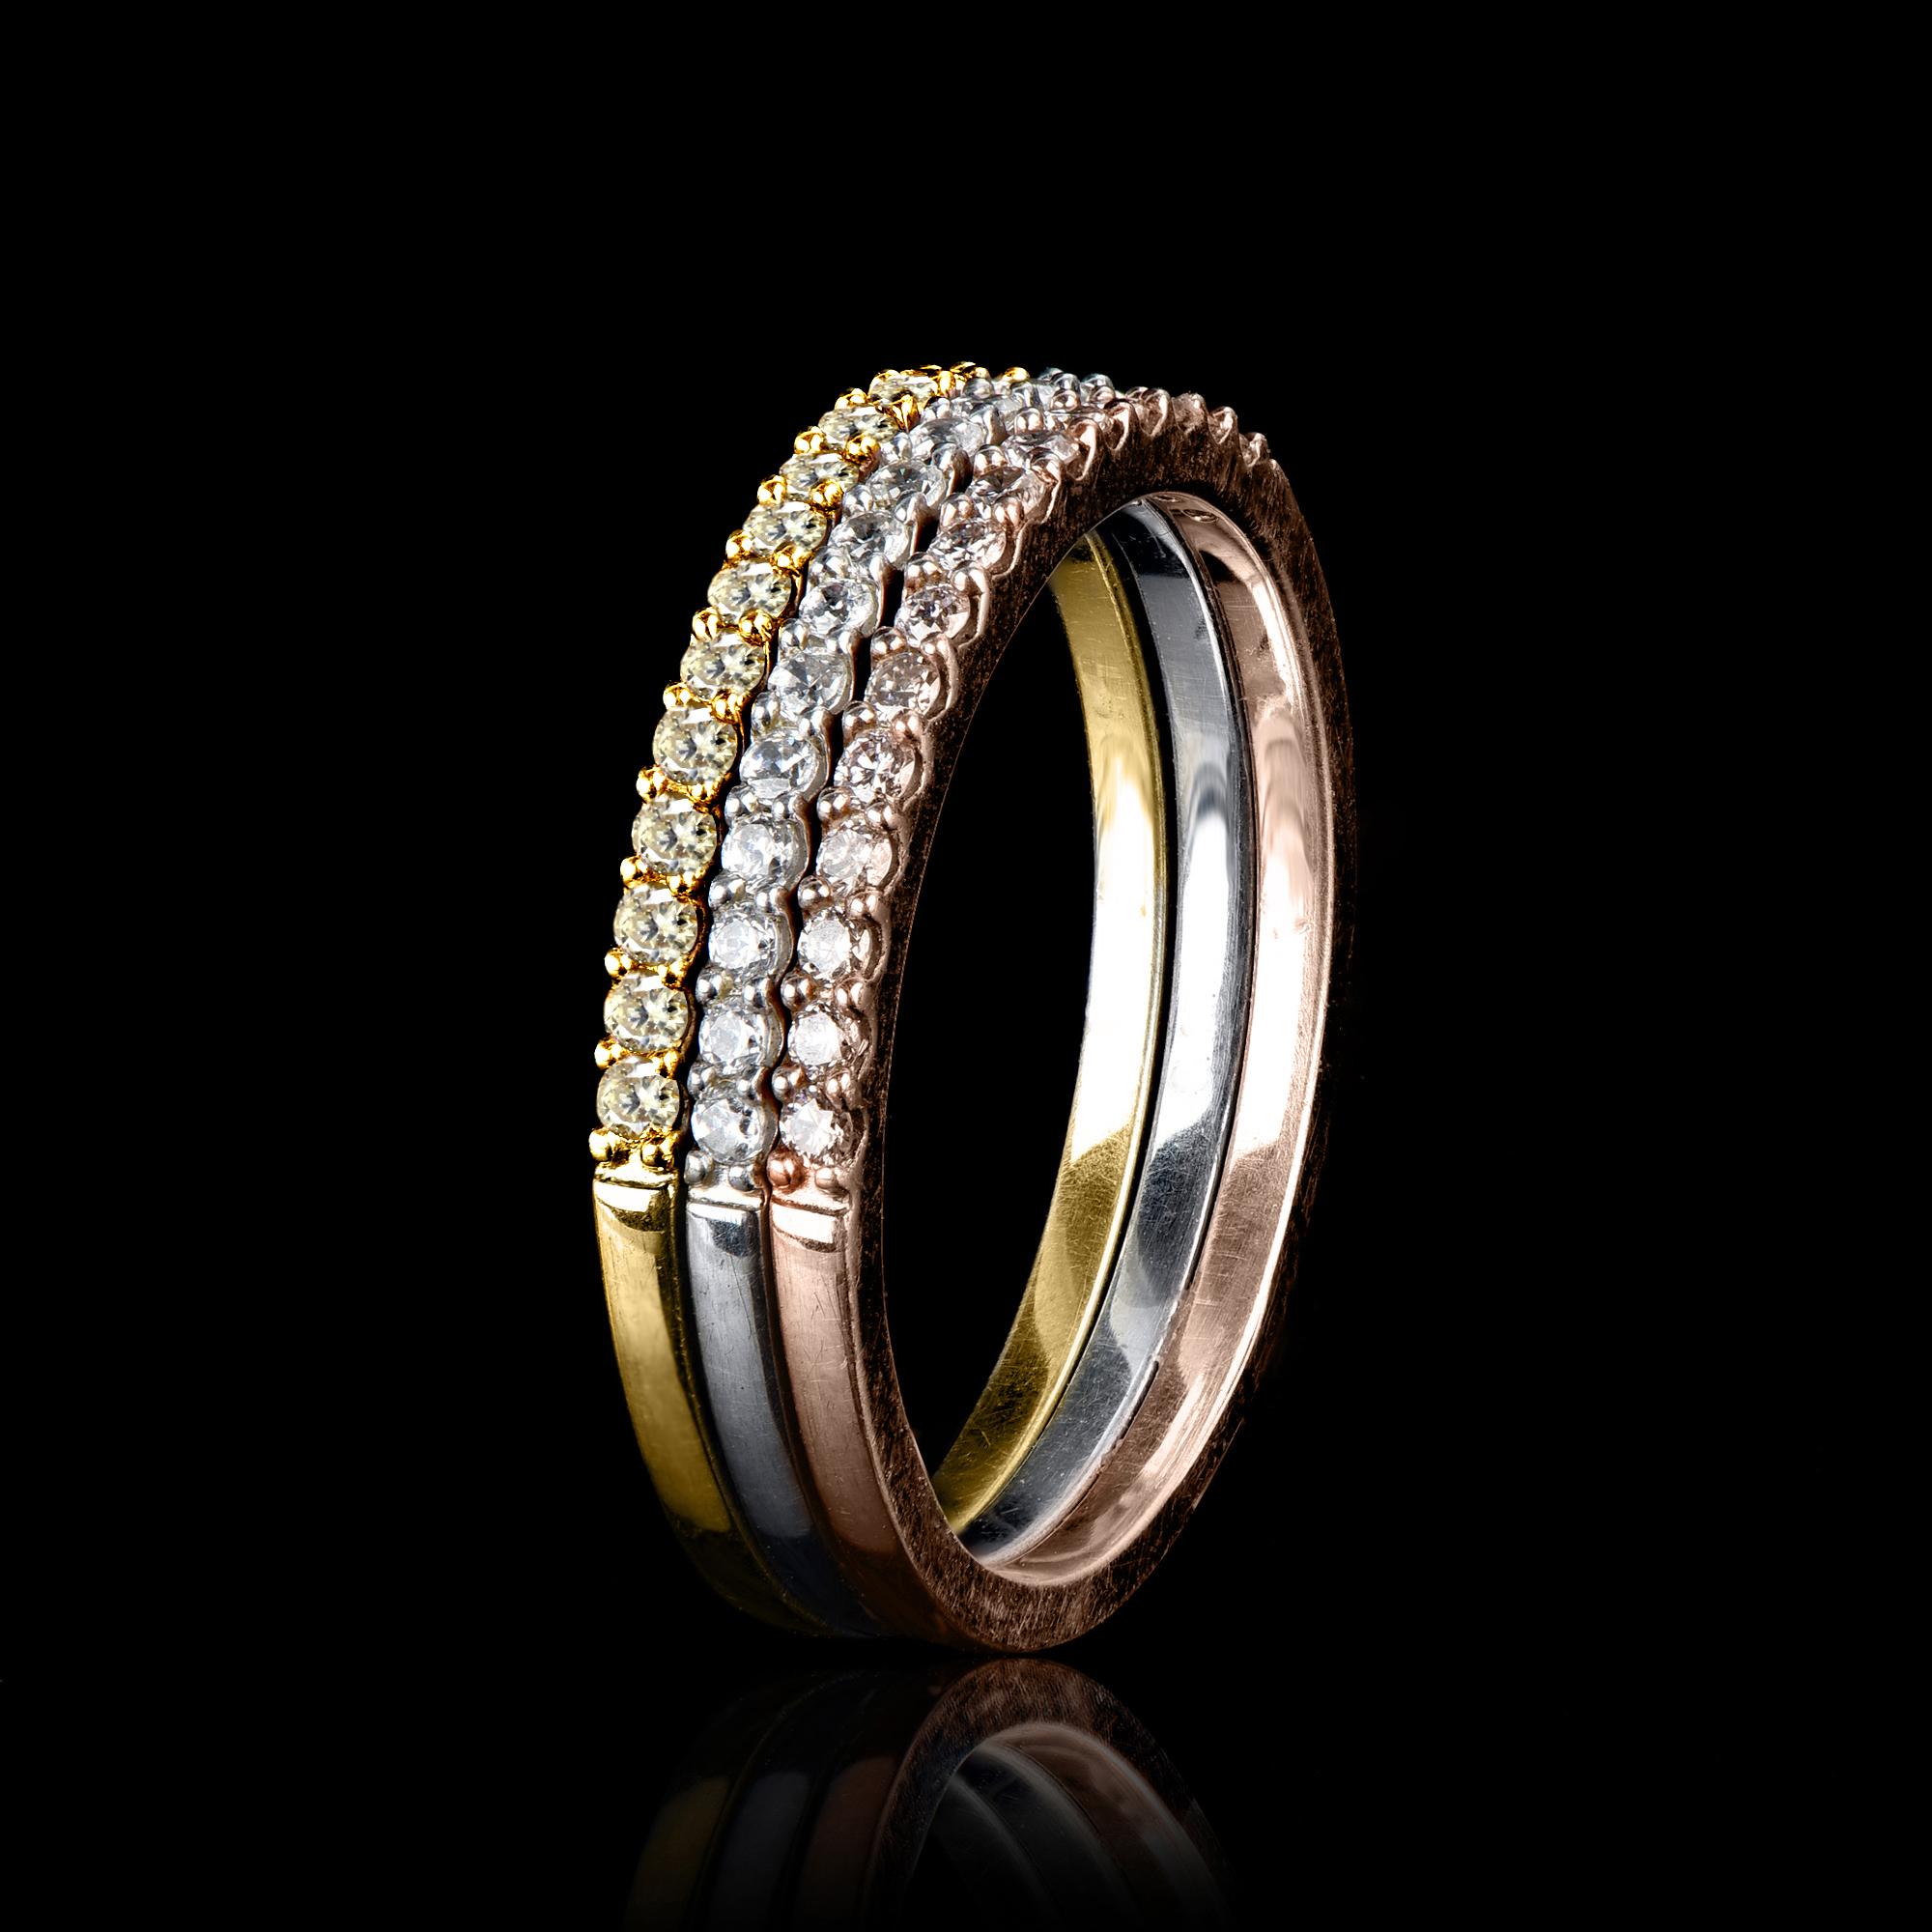 Stackable Band Ring is expertly crafted in 14 Karat and features 15 round cut white and 30 natural pink rosé diamonds set in pave setting. The diamonds are natural, not-treated and conflict-free with H-I color I1 clarity. This ring has high polish